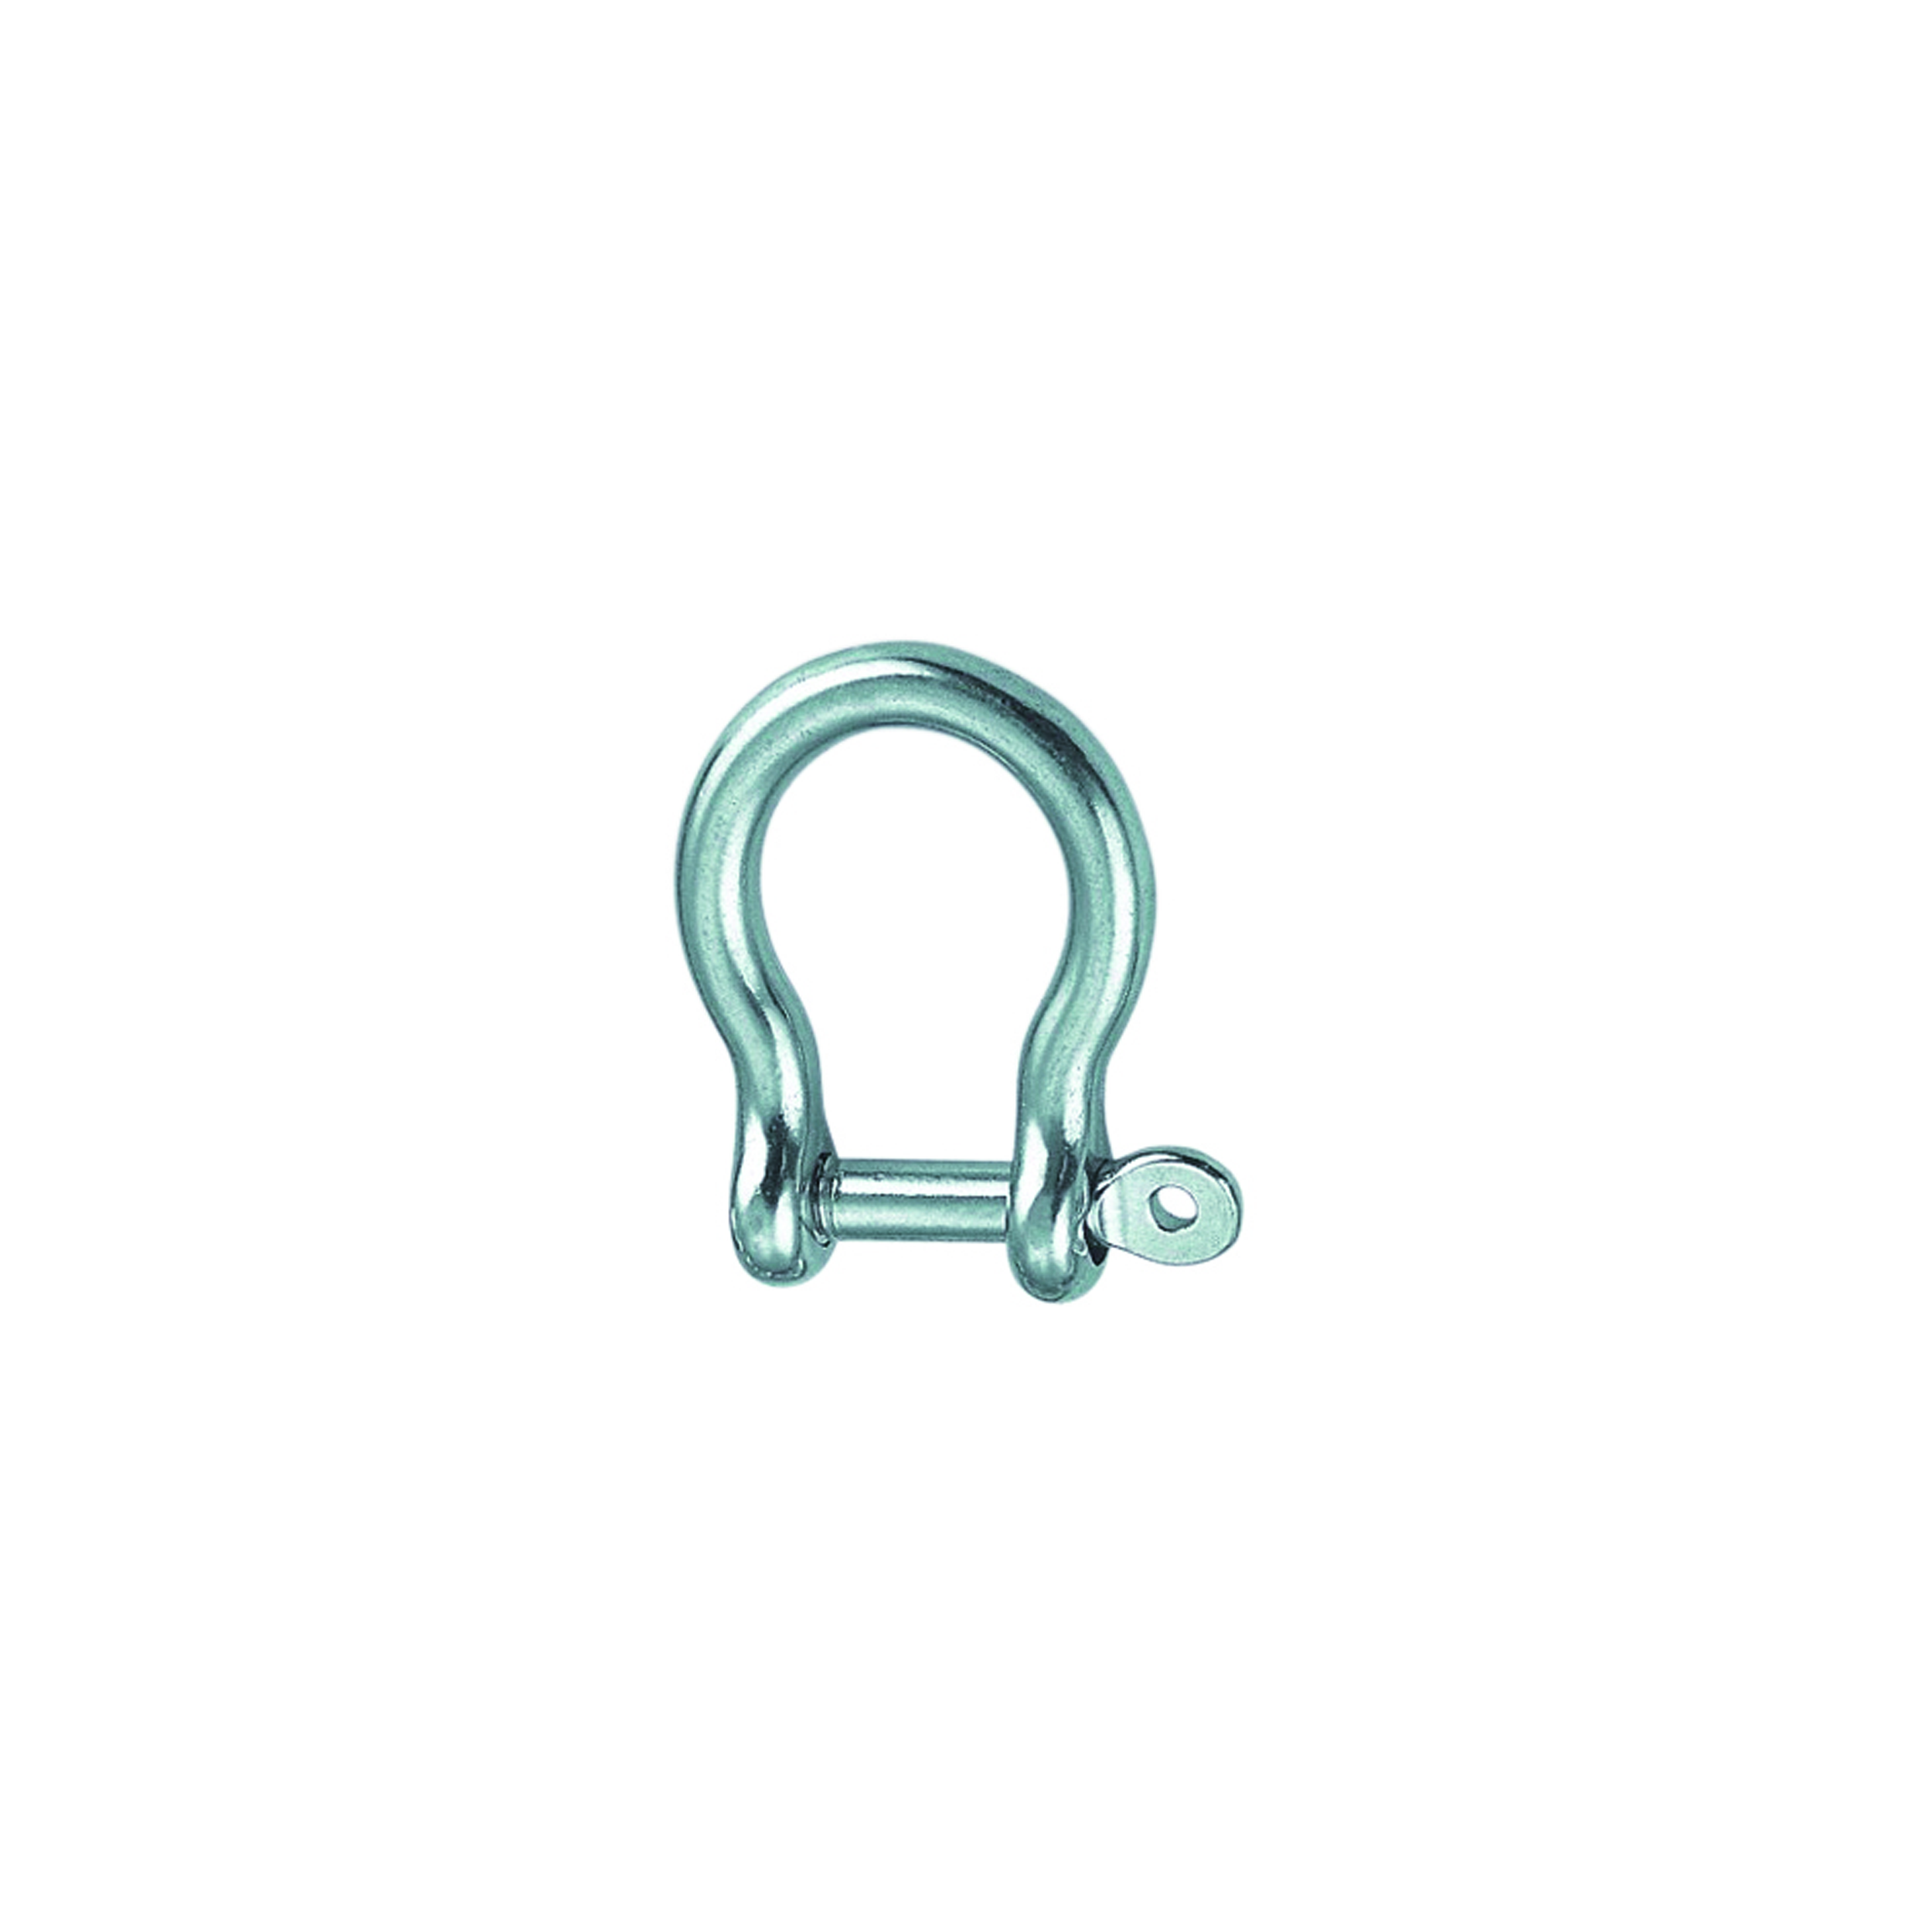 10 STCK / PCS. Bow shackle with captive pin A4  5mm